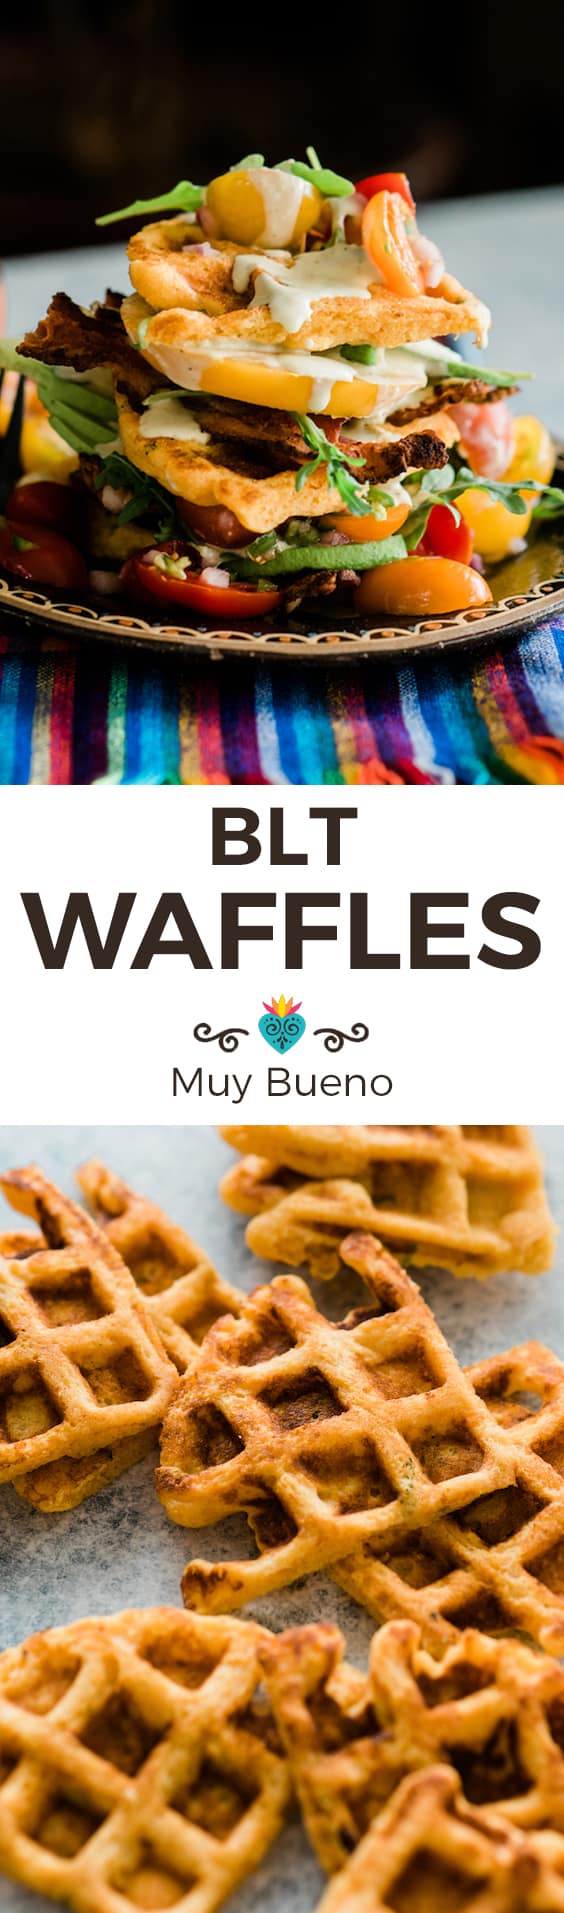 BLT Waffles collage with text overlay